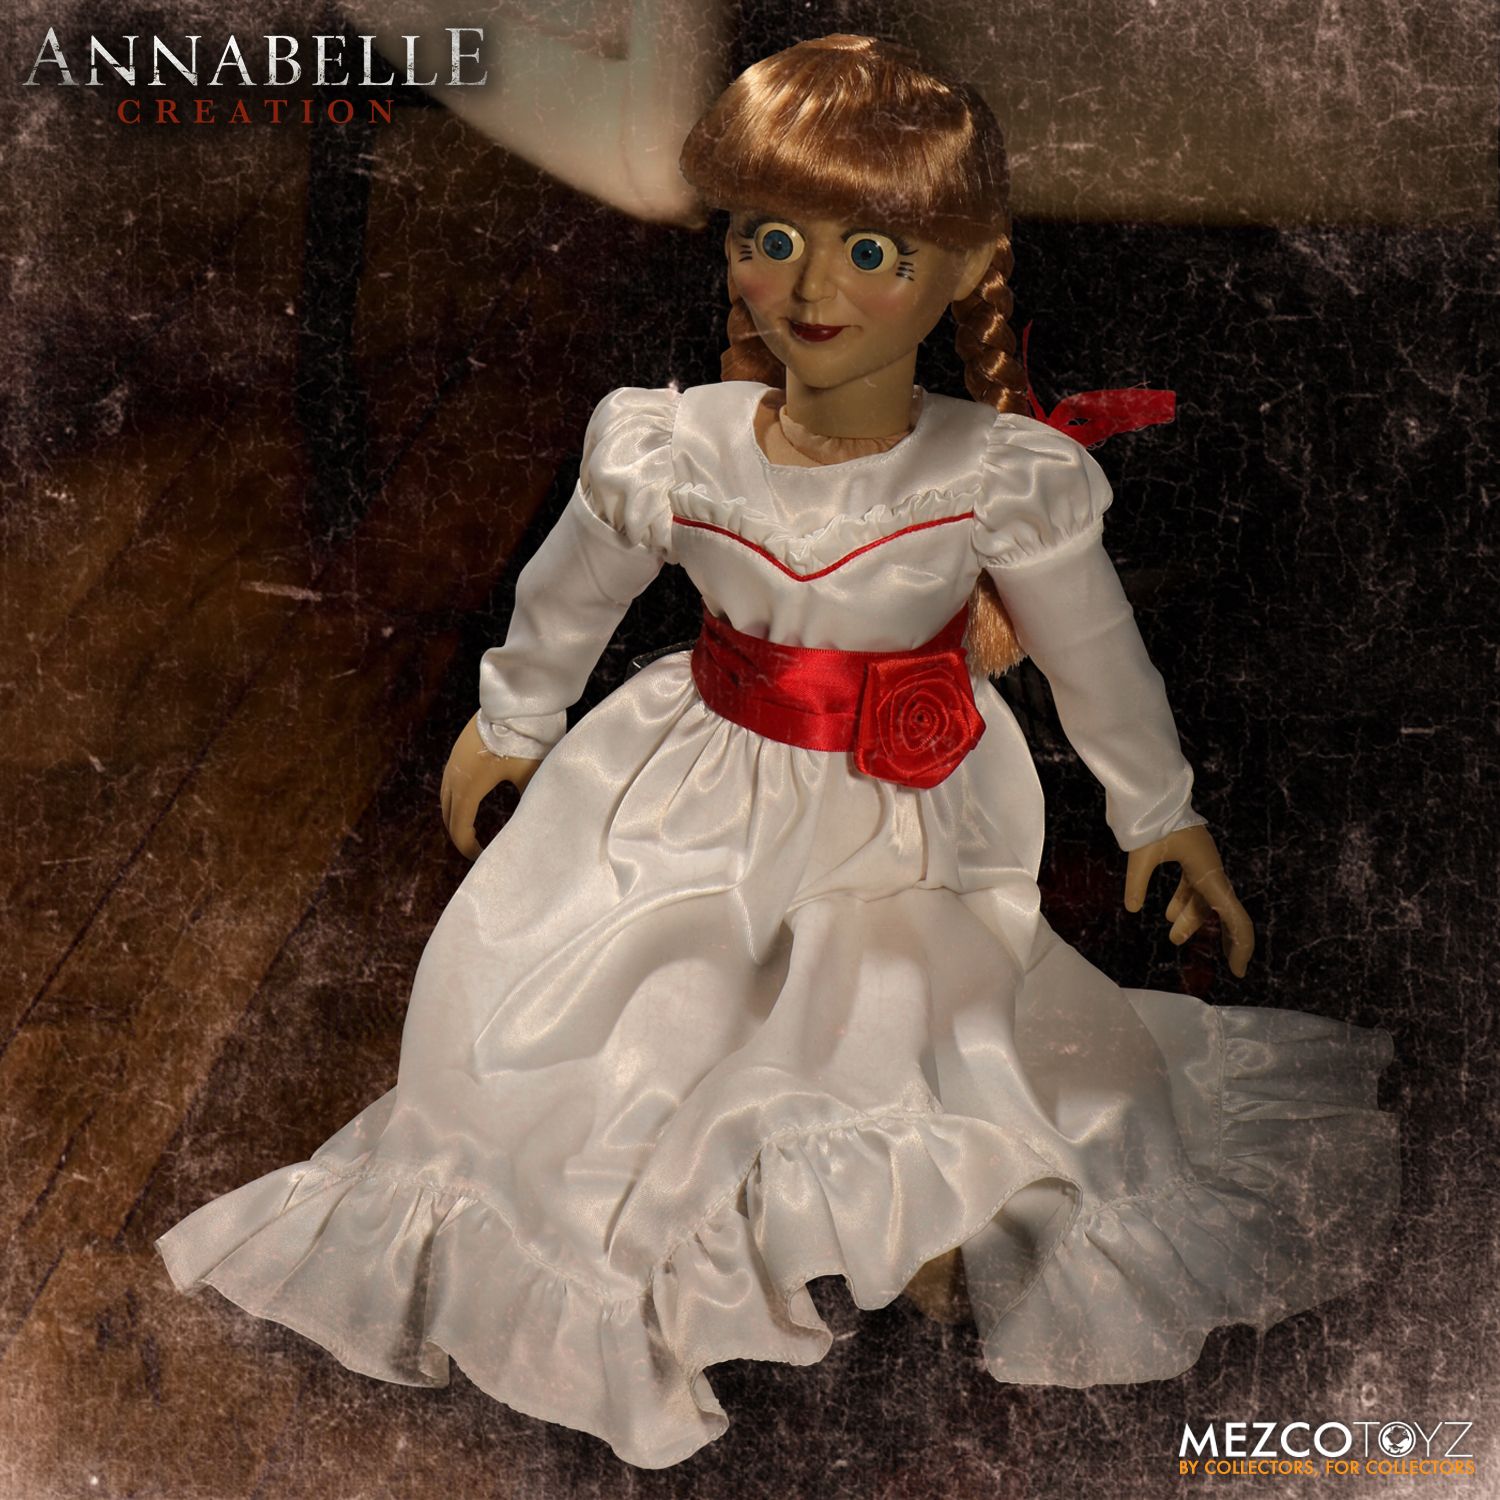 annabelle doll to buy